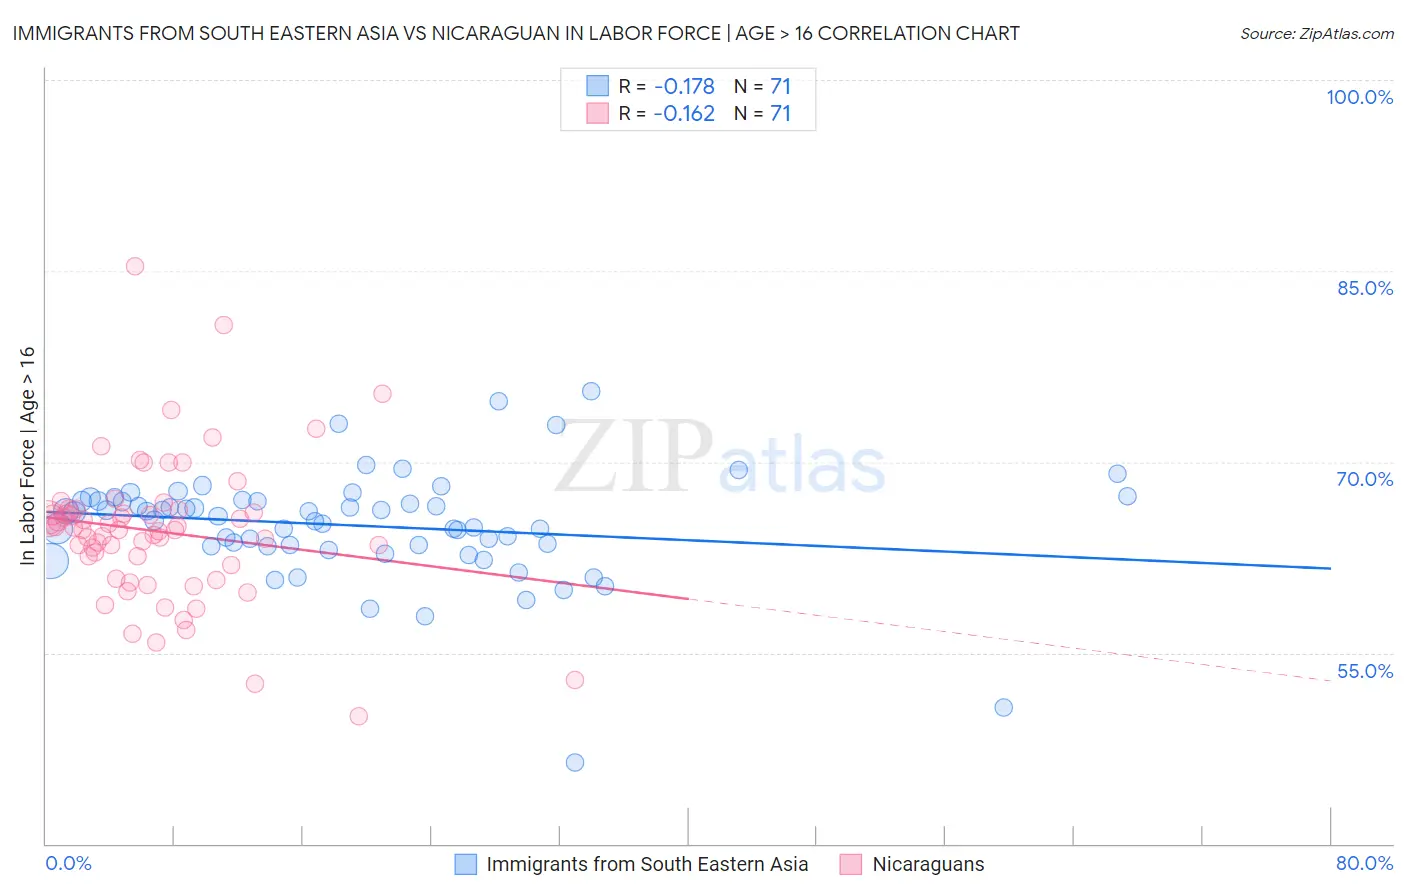 Immigrants from South Eastern Asia vs Nicaraguan In Labor Force | Age > 16